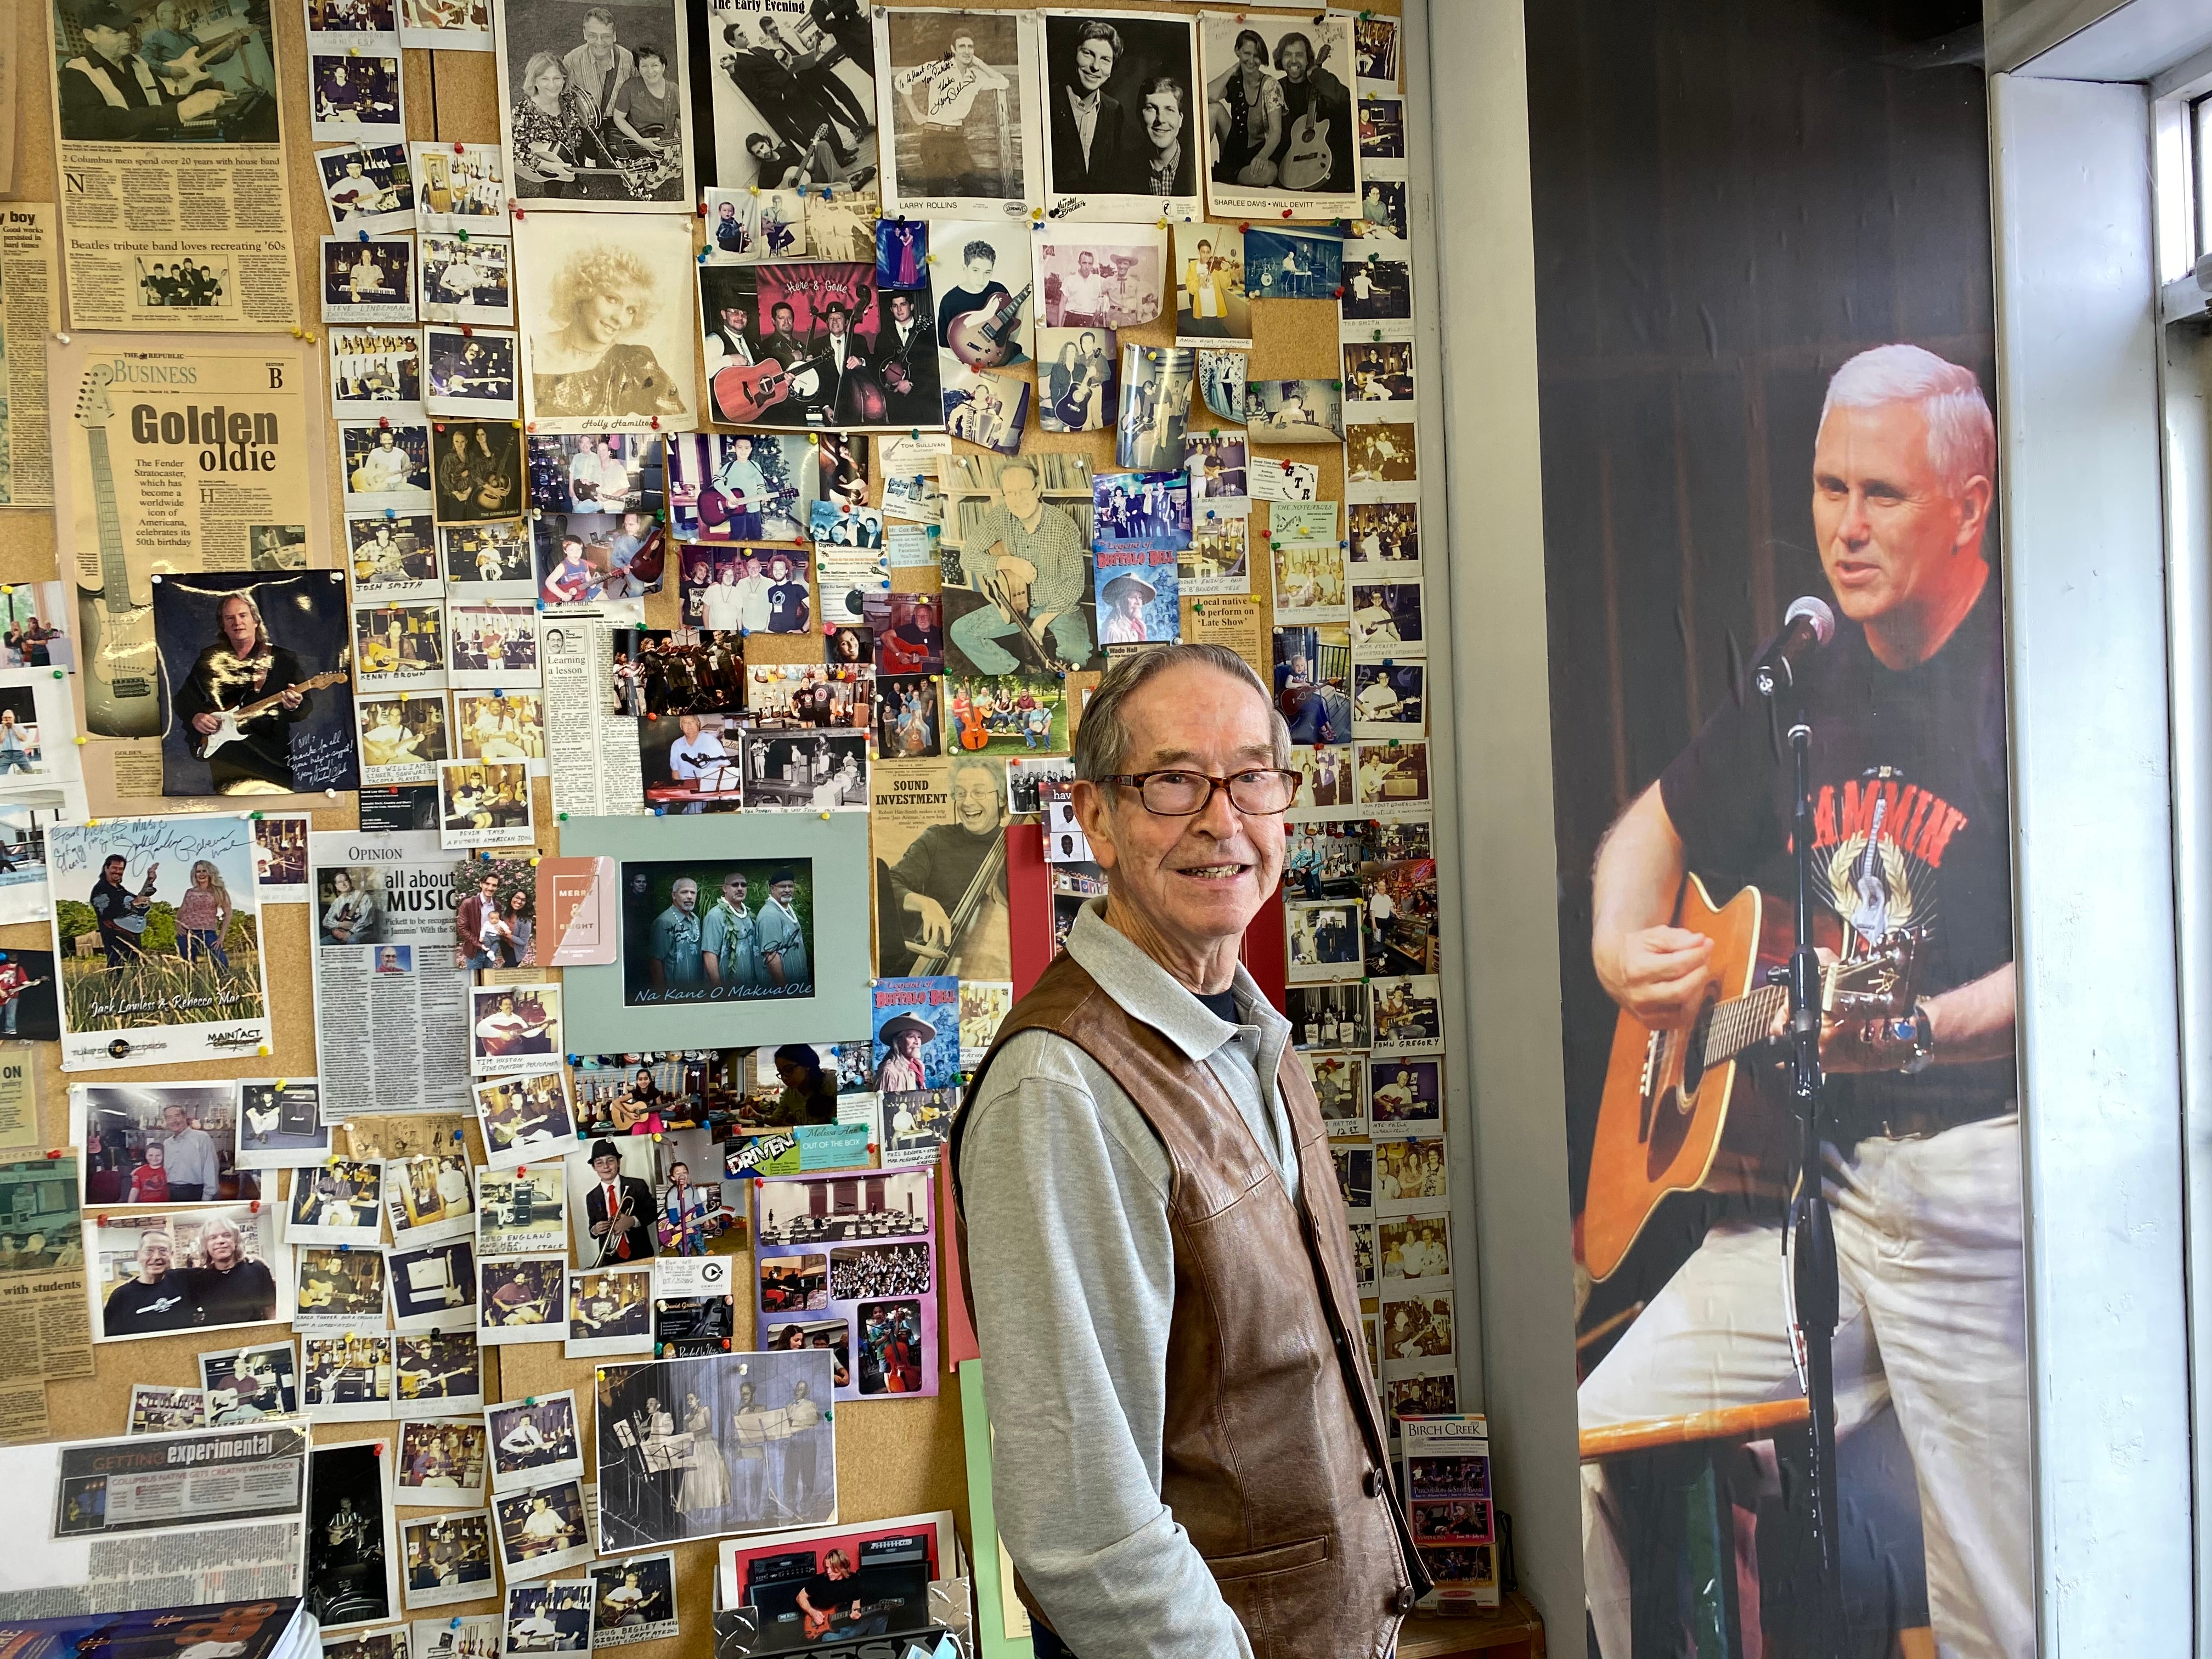 Tom Pickett, who taught Pence how to play the guitar in high school, has a life-size photograph of the former VP in his music shop in Columbus